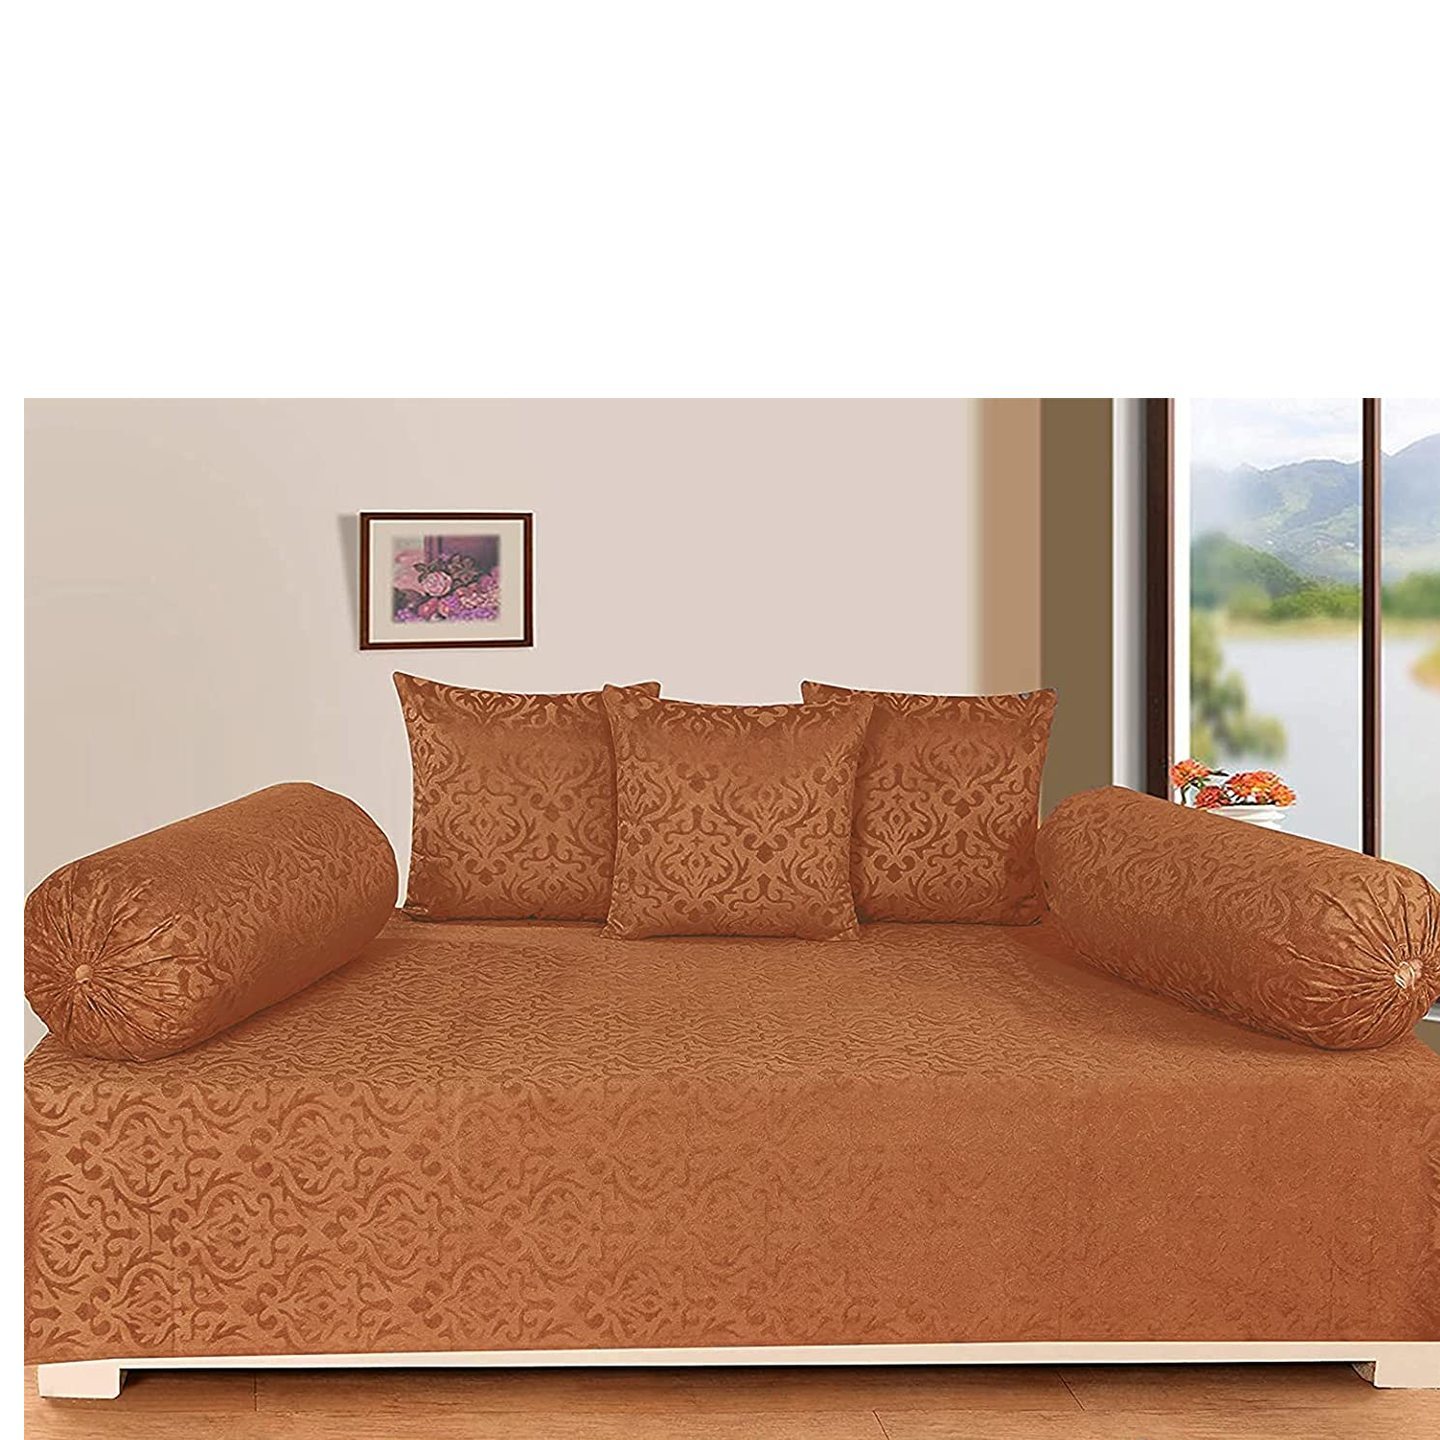 Handtex Home Premium Velvet Diwan Set of 6 Pieces -1 BedSheet, 2pc Bolster Cover with Dori and 3pc Cushion Covers Camel Colour-6Pc Set